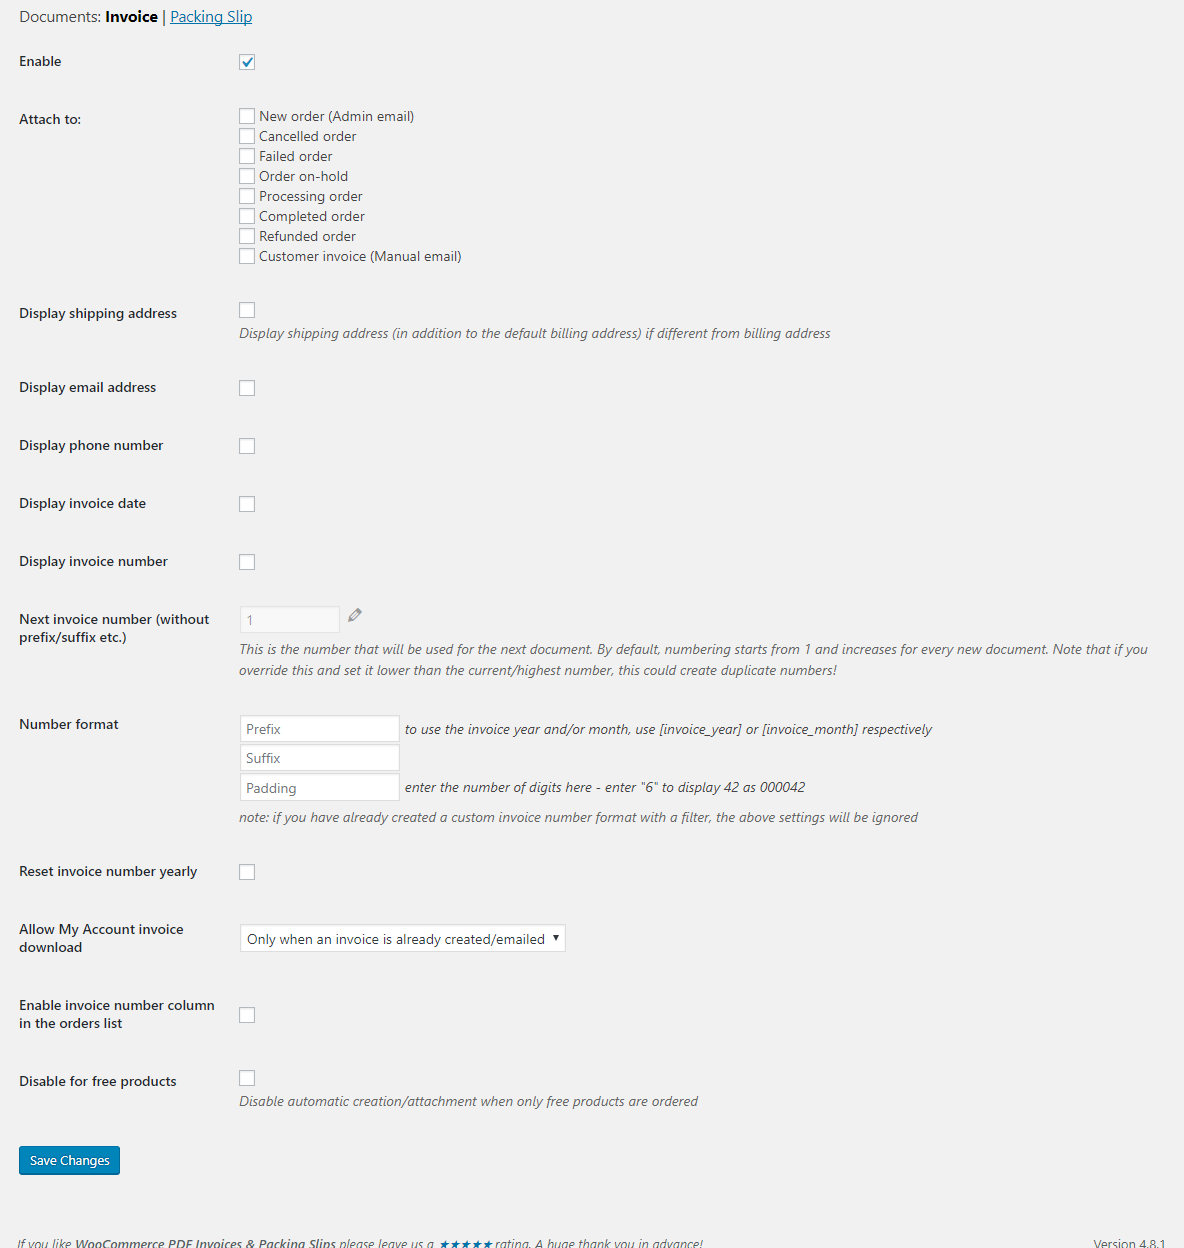 Customize content for Invoice